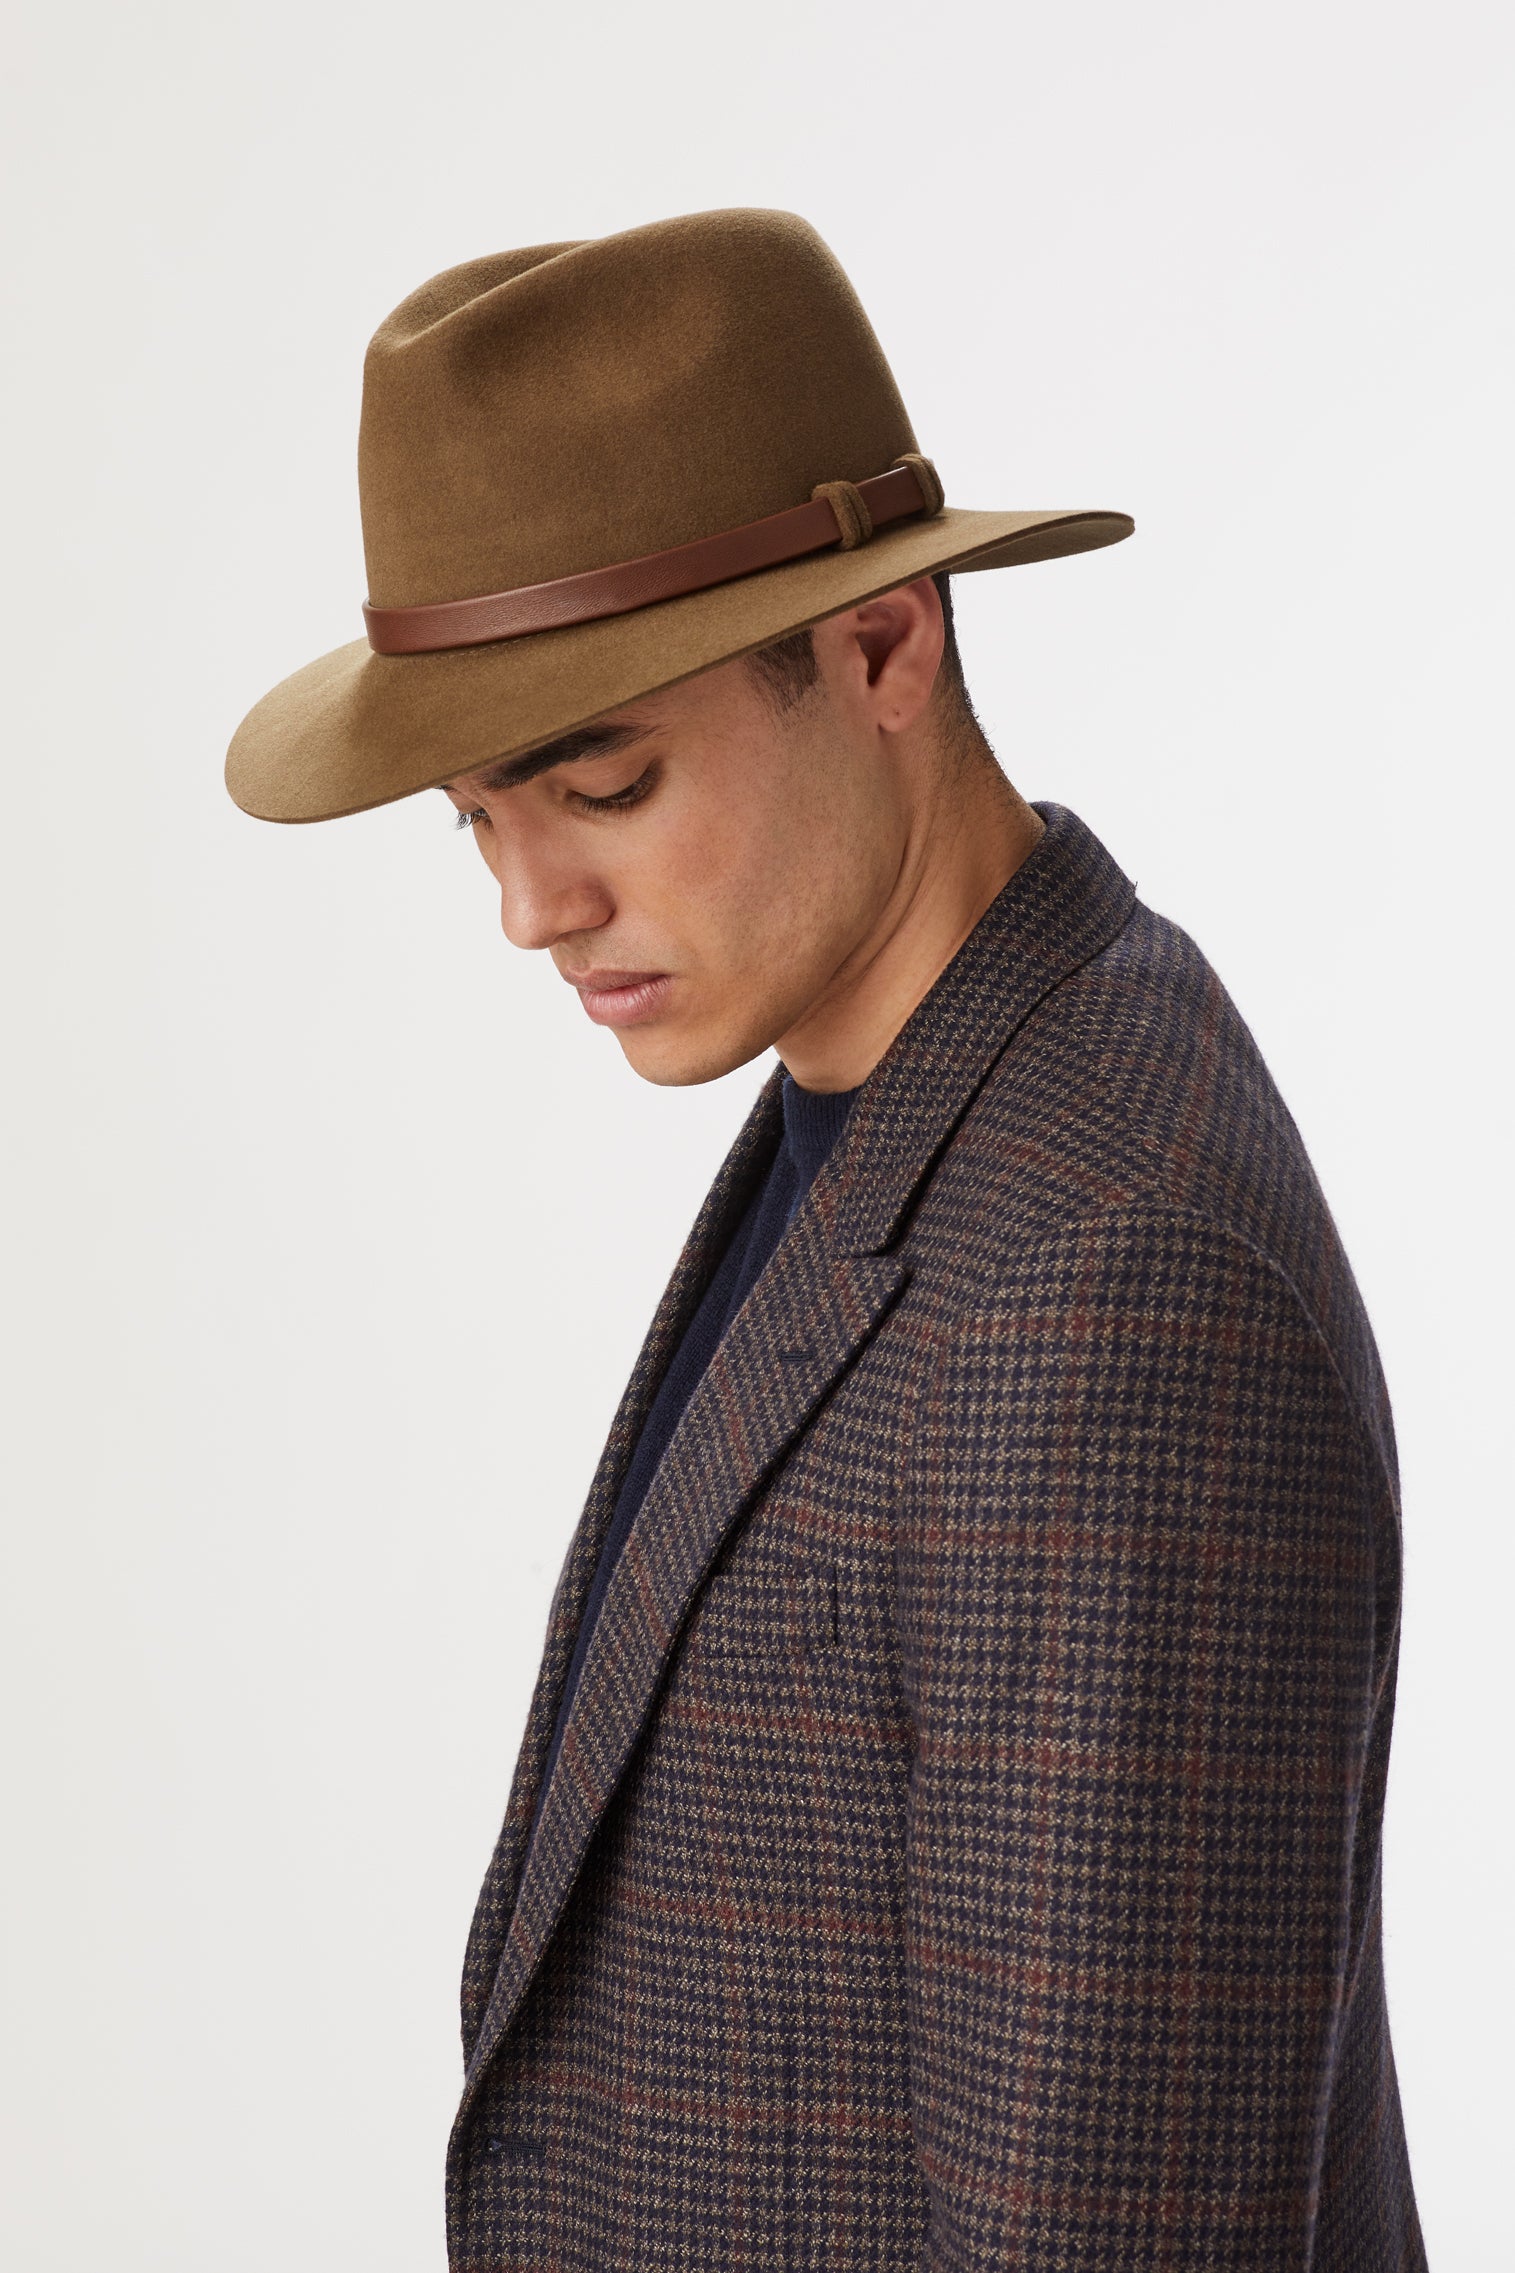 Chepstow Trilby - Products - Lock & Co. Hatters London UK